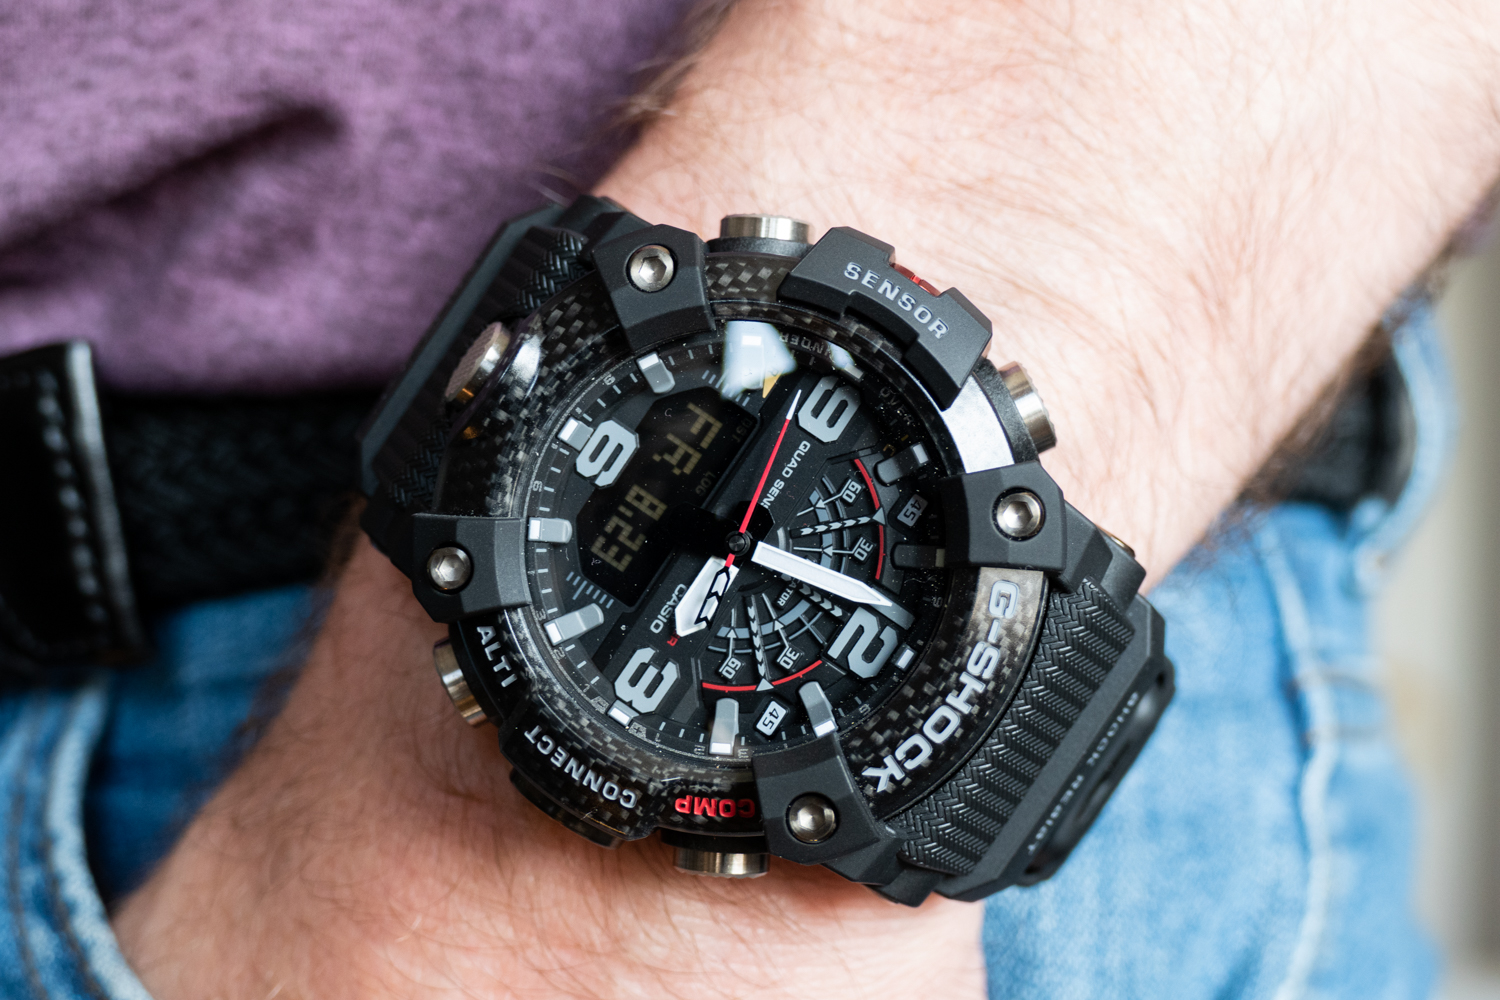 The Carbon-Cased G-Shock Watch is Still Extreme as Ever | Digital Trends